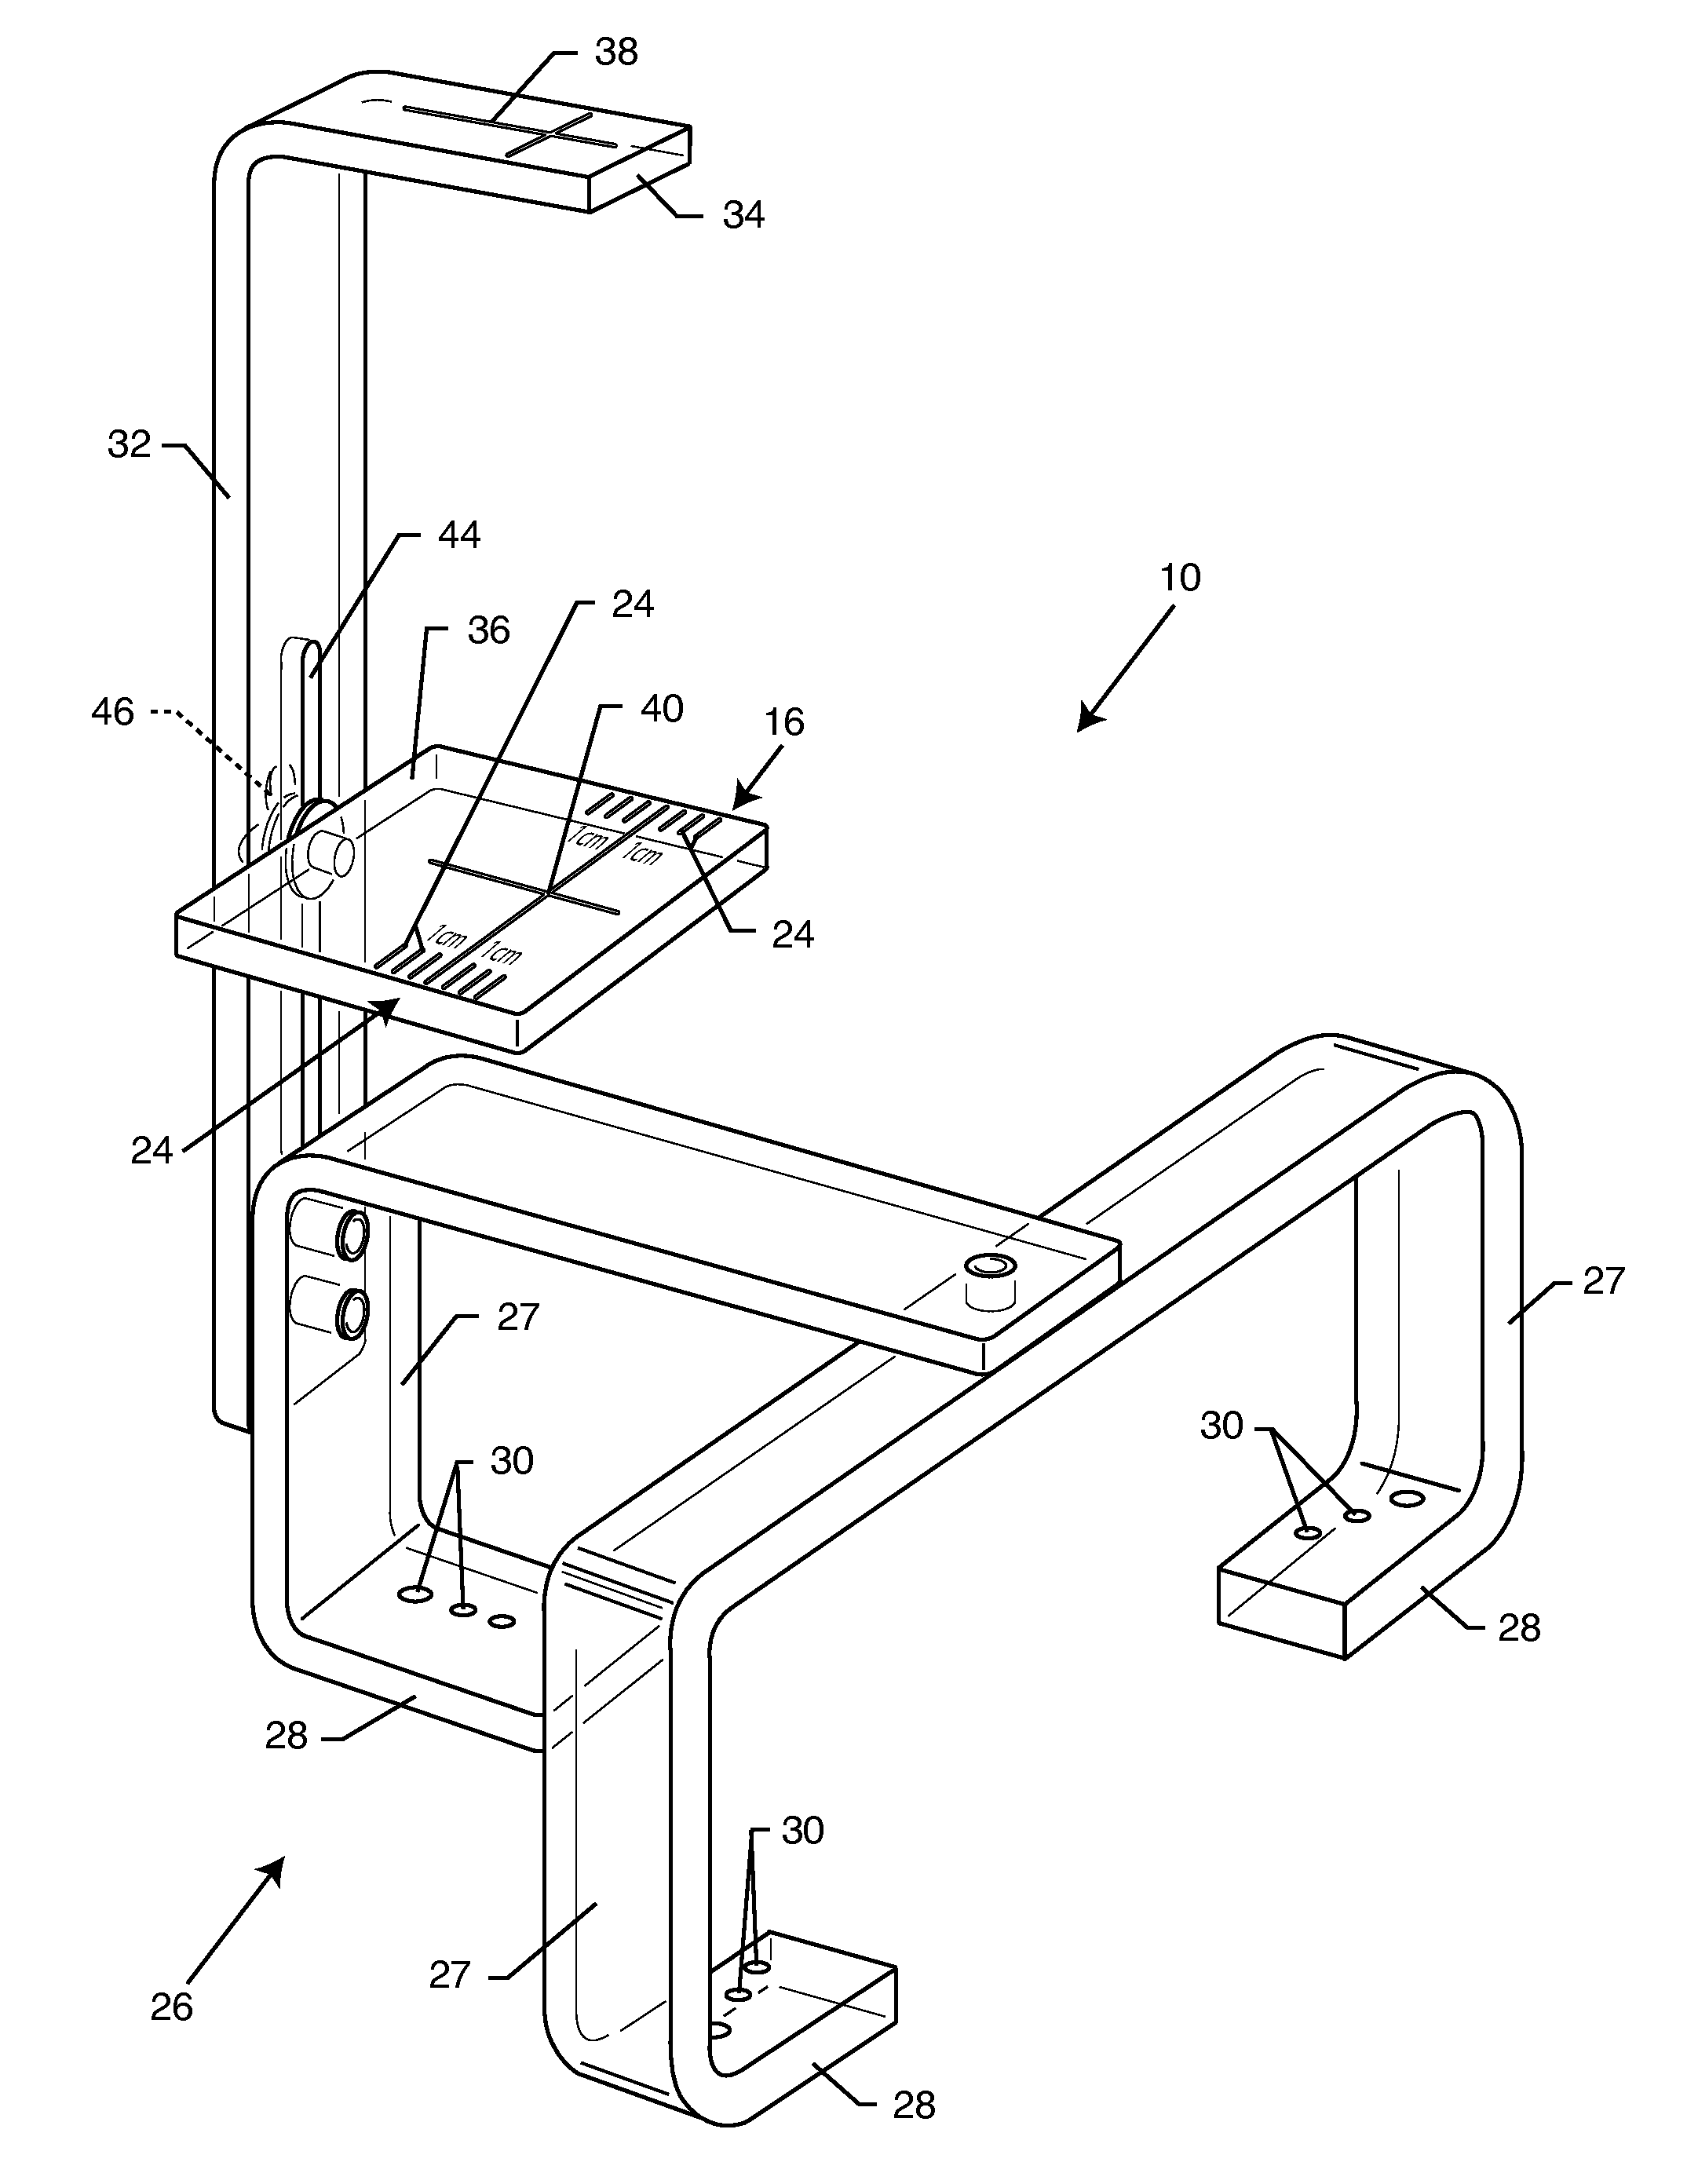 Alignment fixture for x-ray images